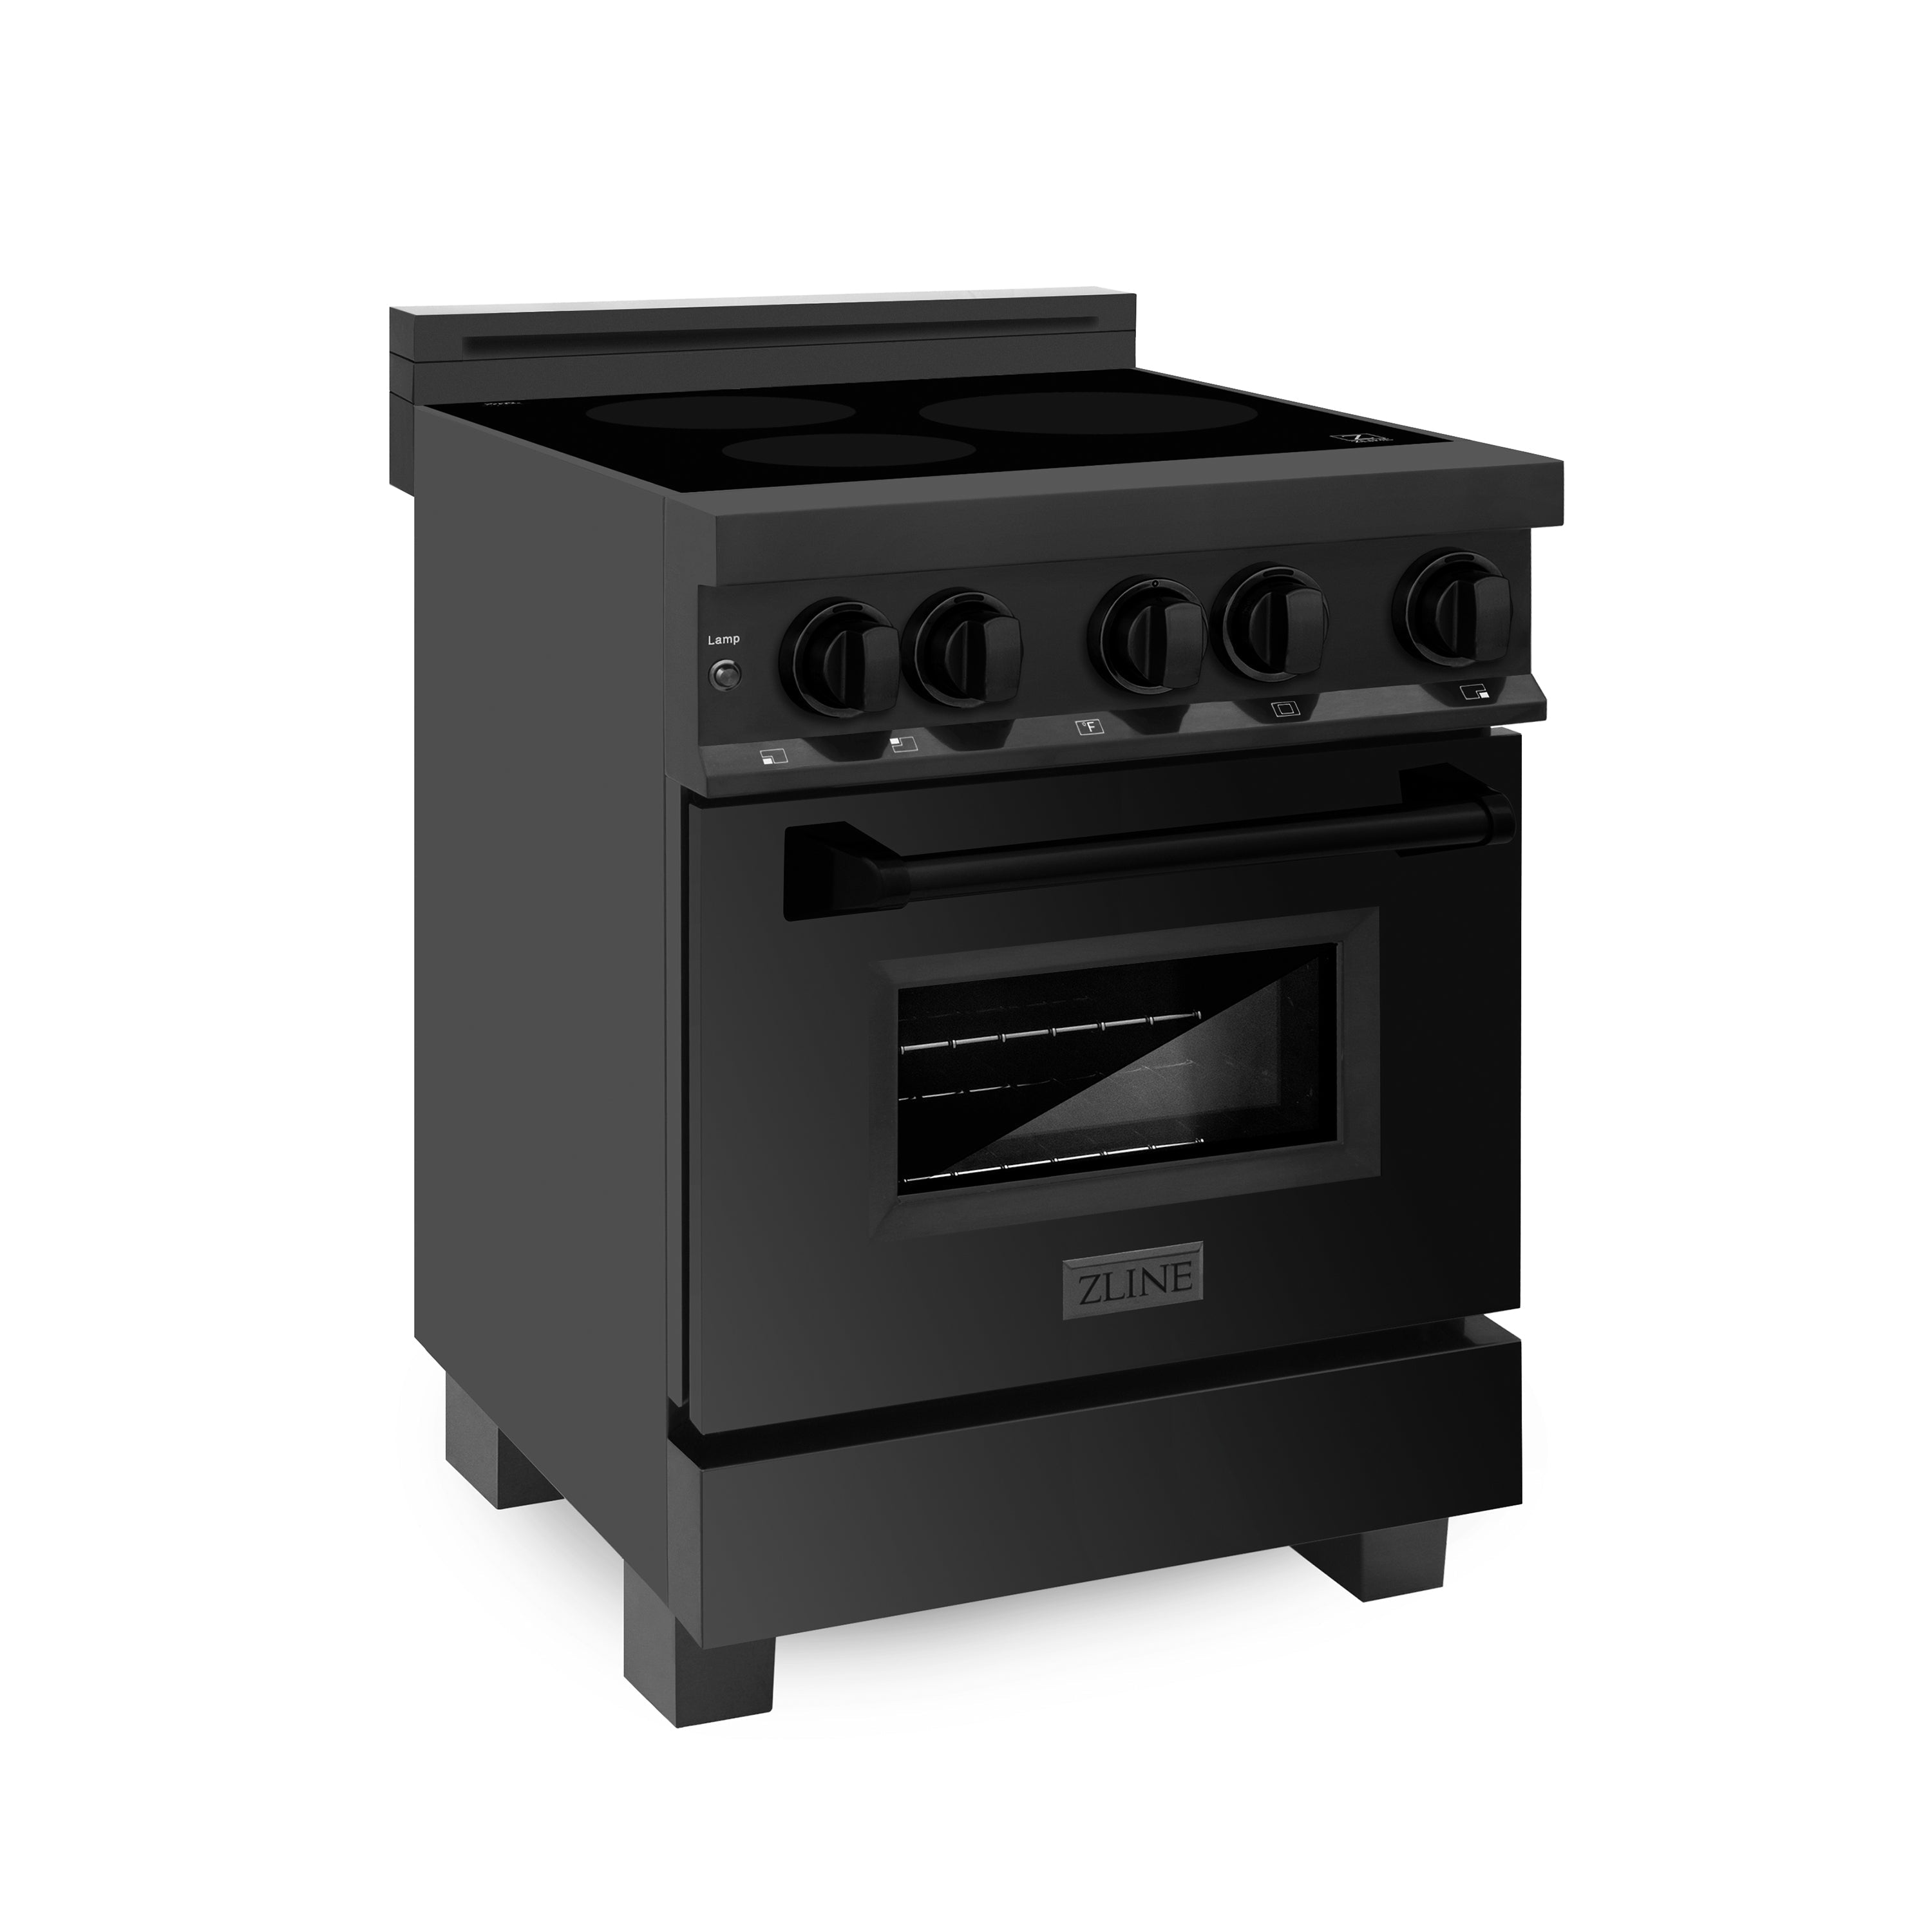 ZLINE 24" 2.8 cu. ft. Induction Range with a 4 Element Stove and Electric Oven in Black Stainless Steel (RAIND-BS-24)